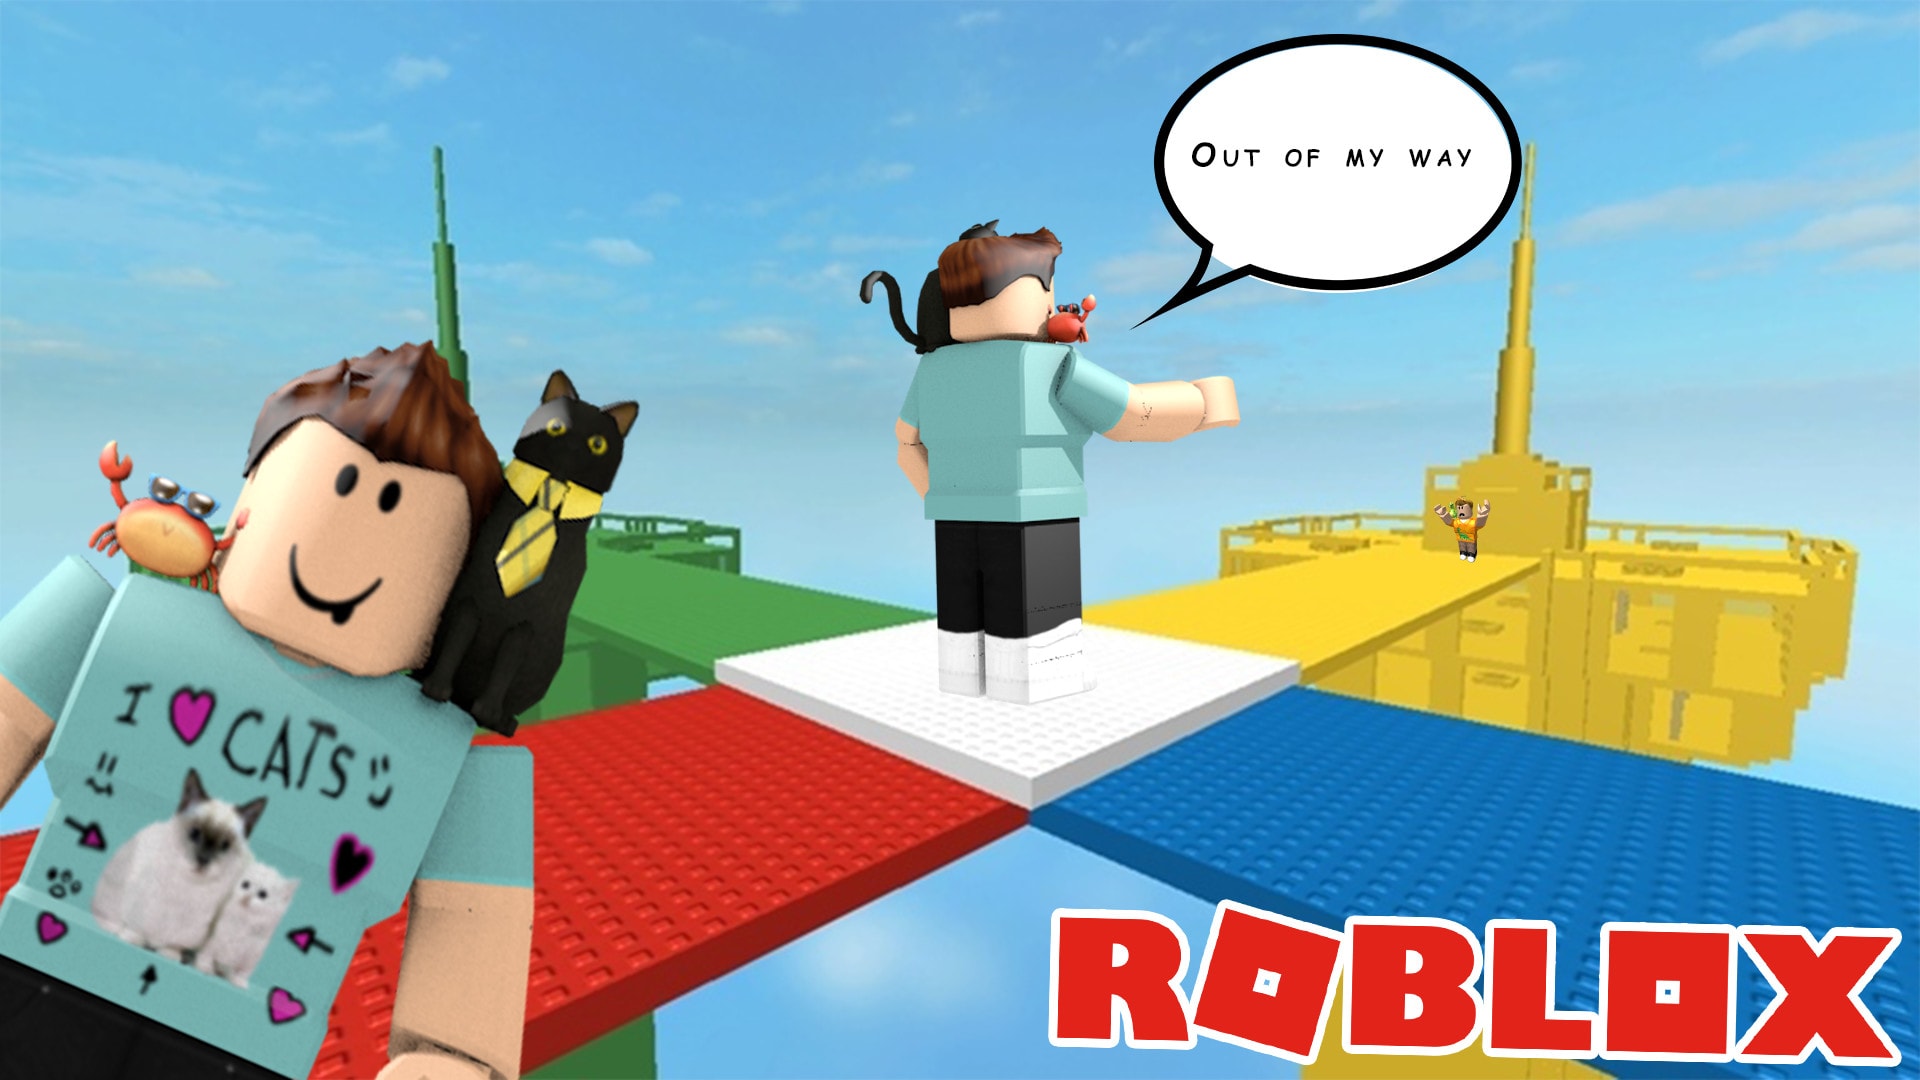 Simply Render And Edit Touch Up Your Roblox Avatar By Eb R519 - roblox mobile avatar editor background